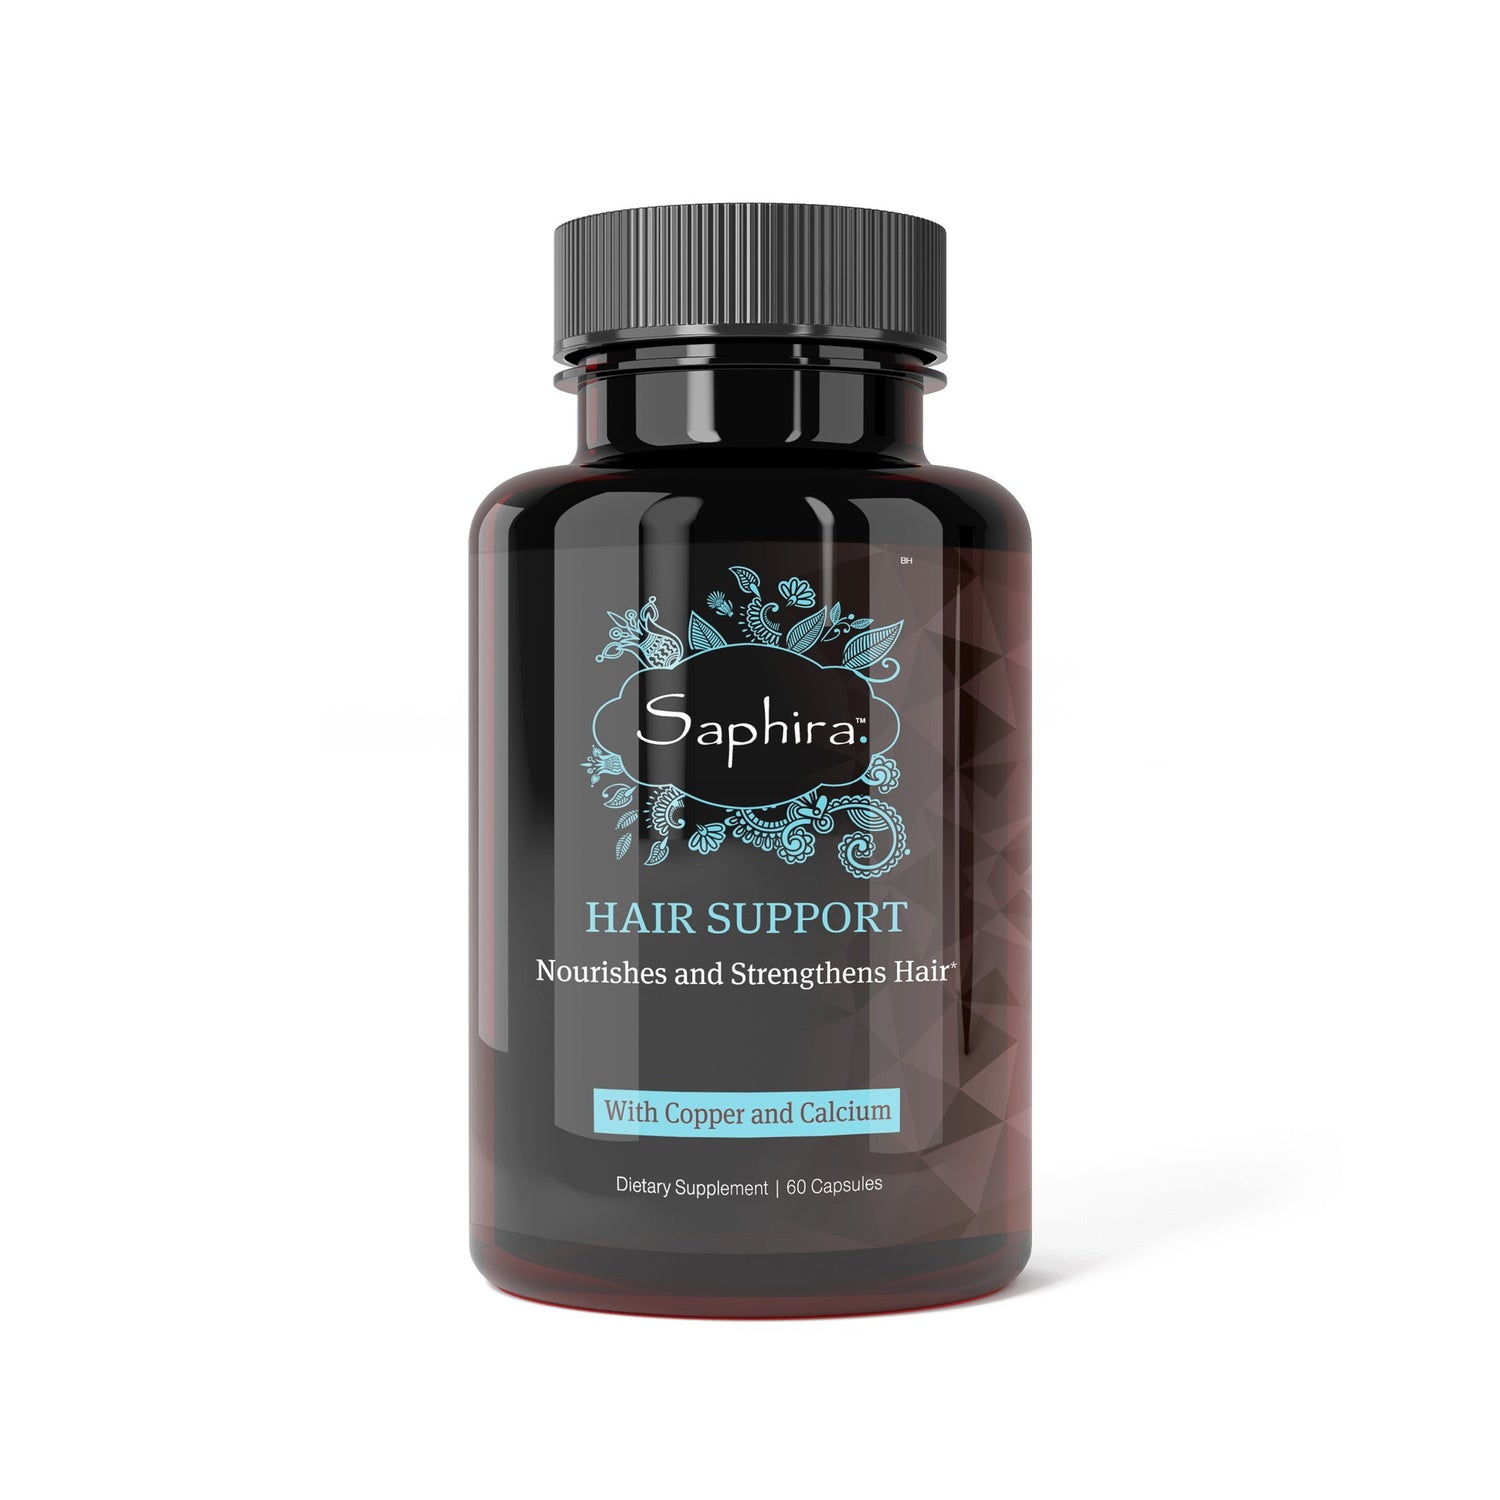 Saphira Hair Support Supplement Nourishes & Strengthens Hair with Copper and Calcium. Dietary Supplement with 60 capsules.